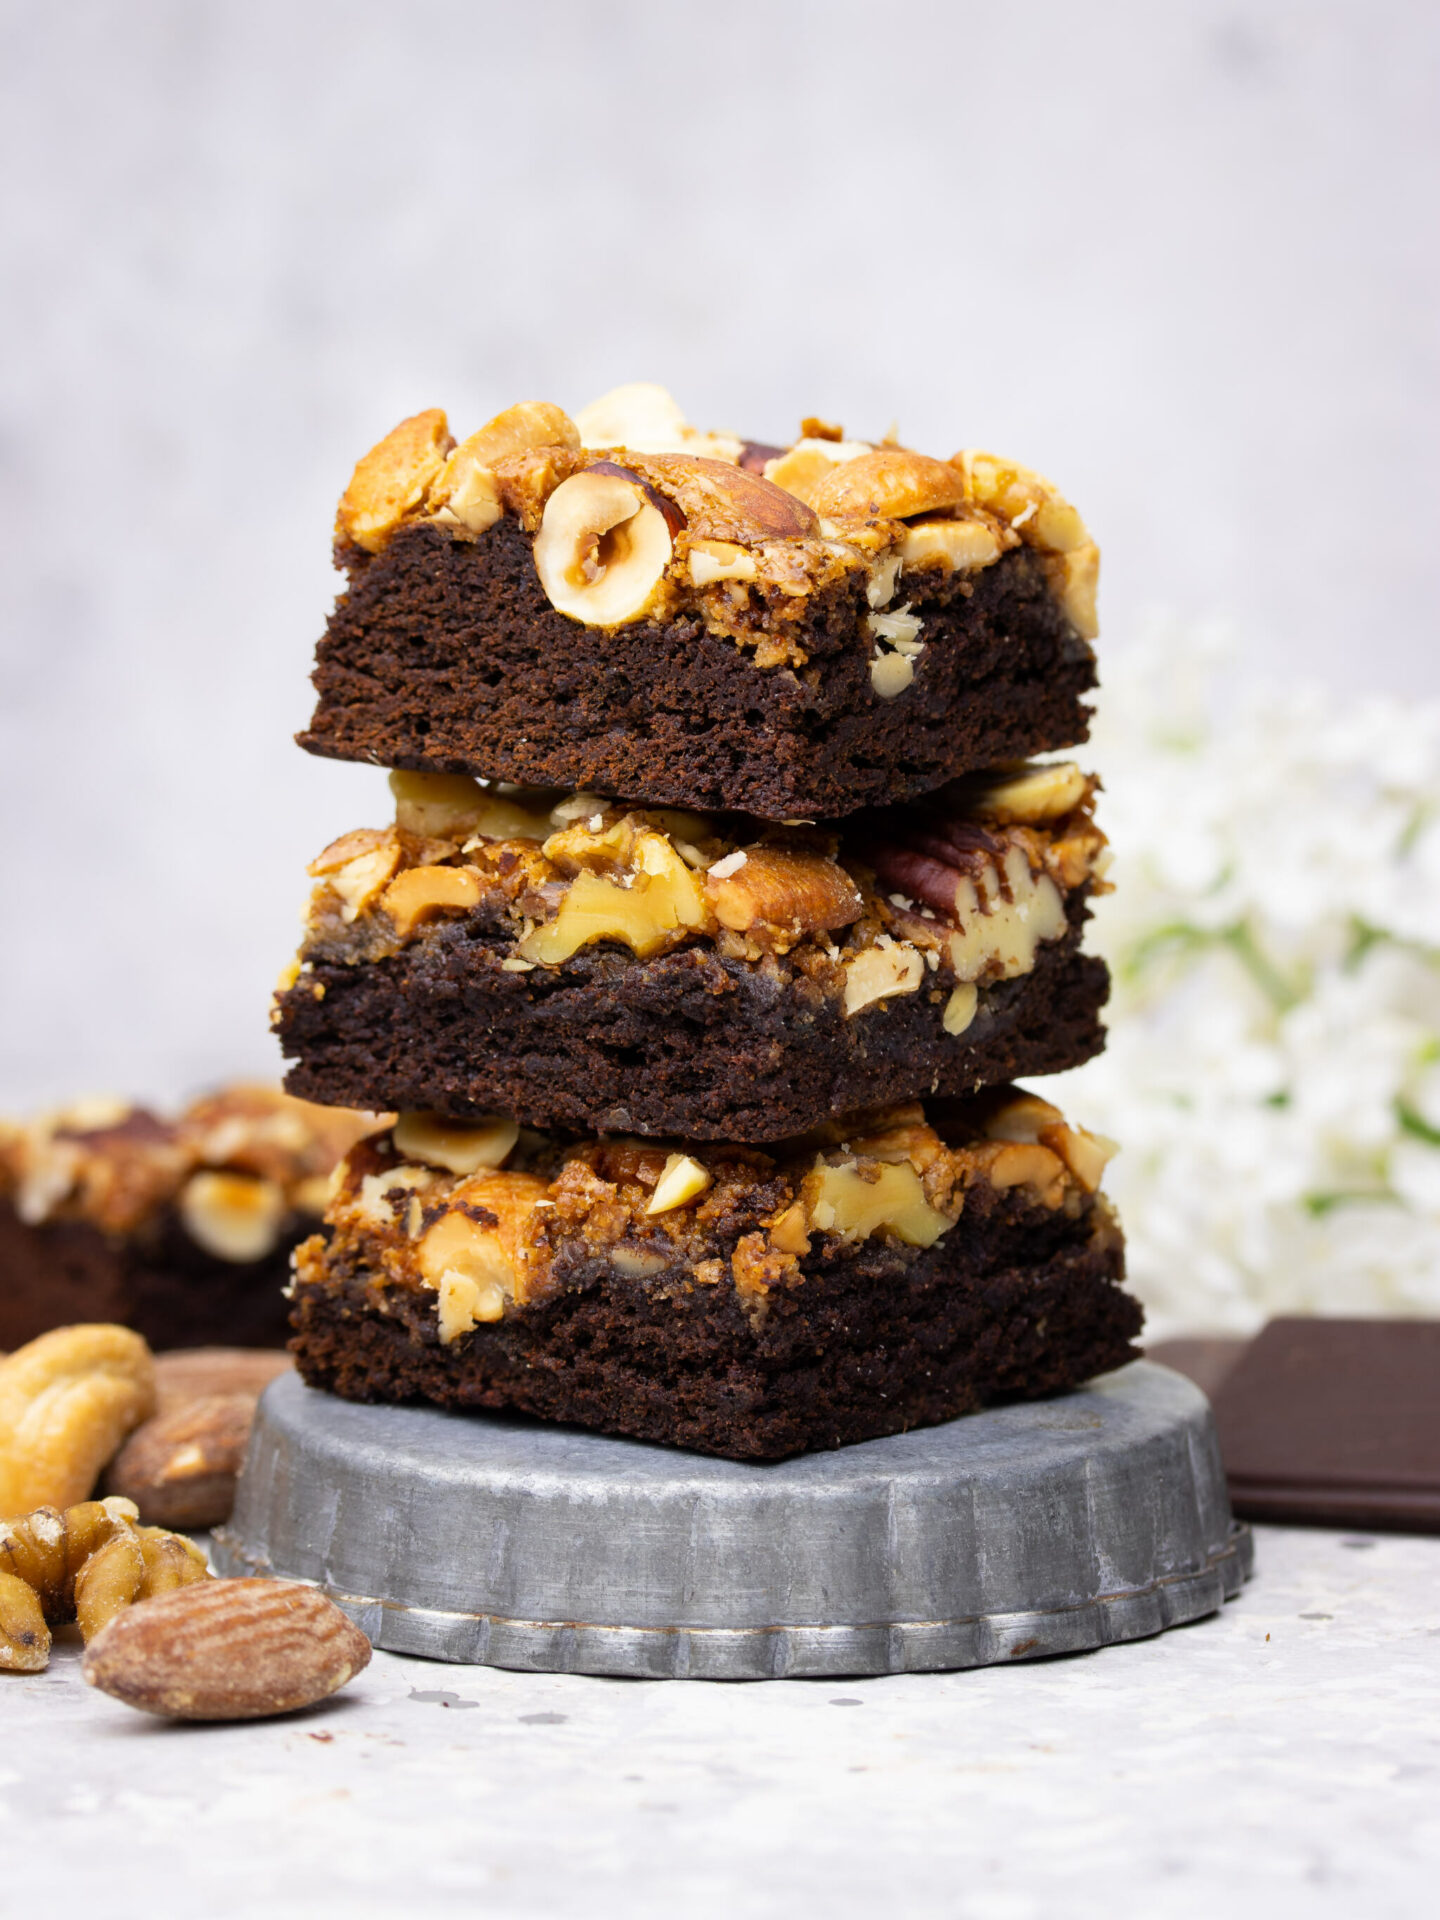 Nuttyholic’s Chewy Salted Caramel Brownies